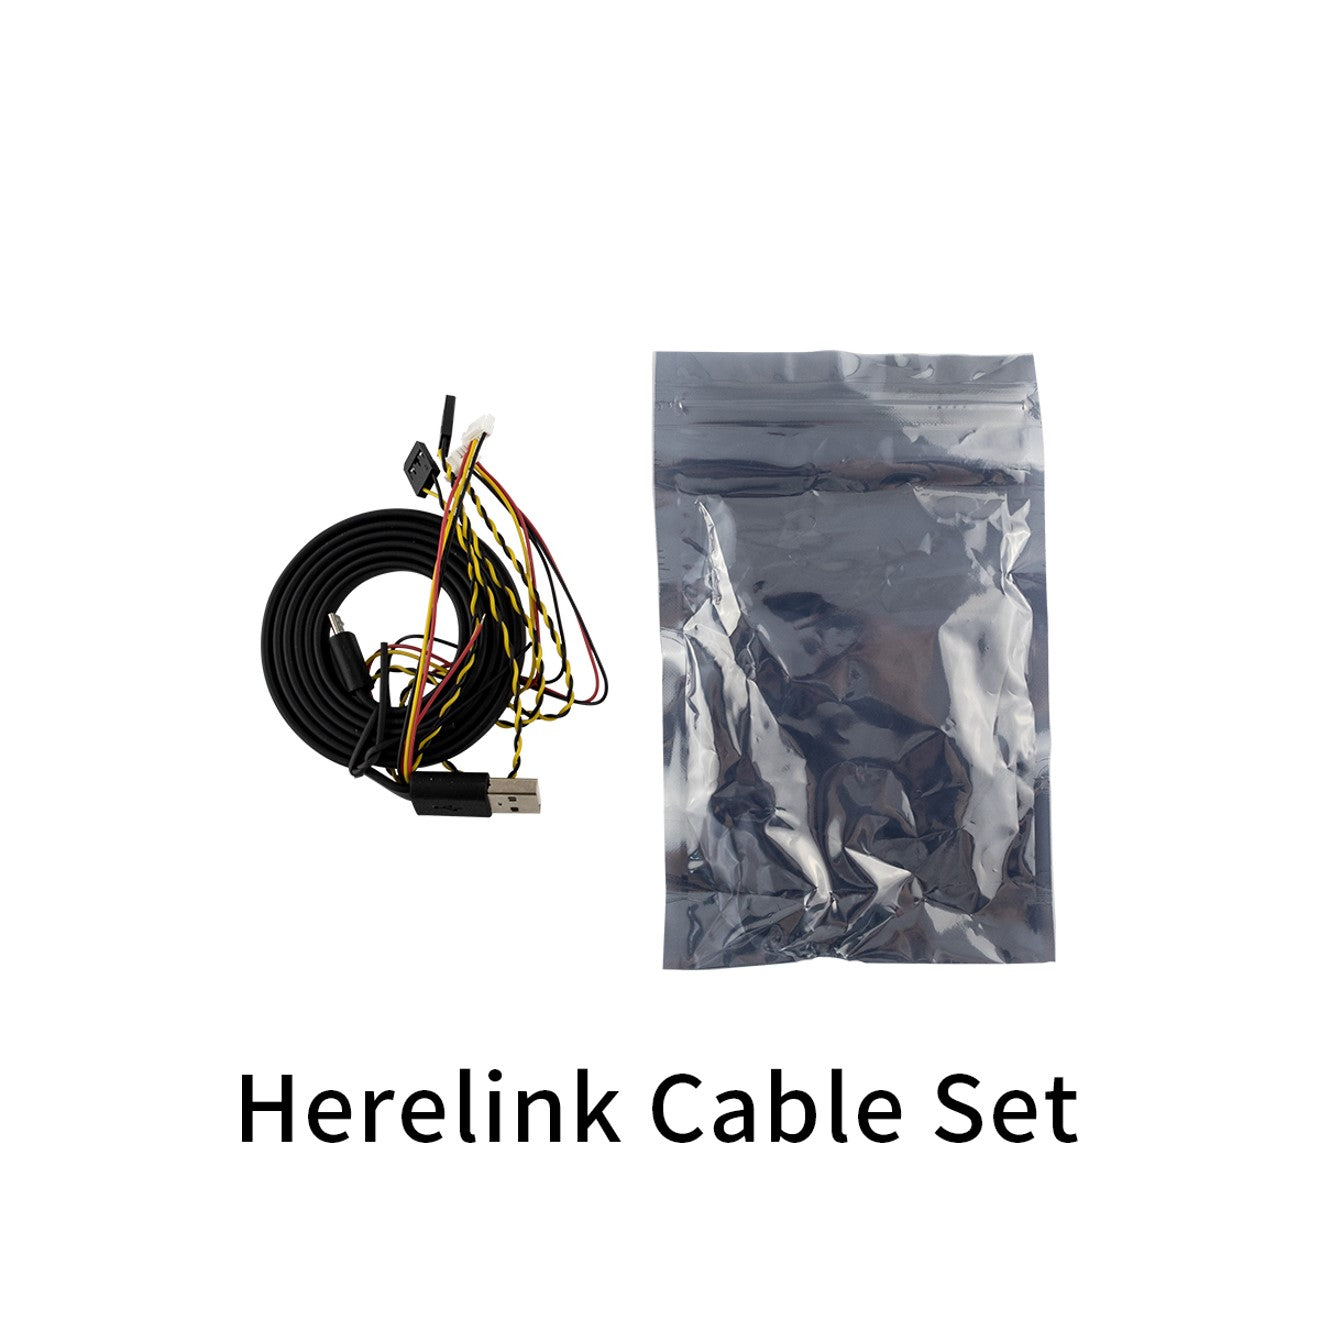 Herelink Cable Set